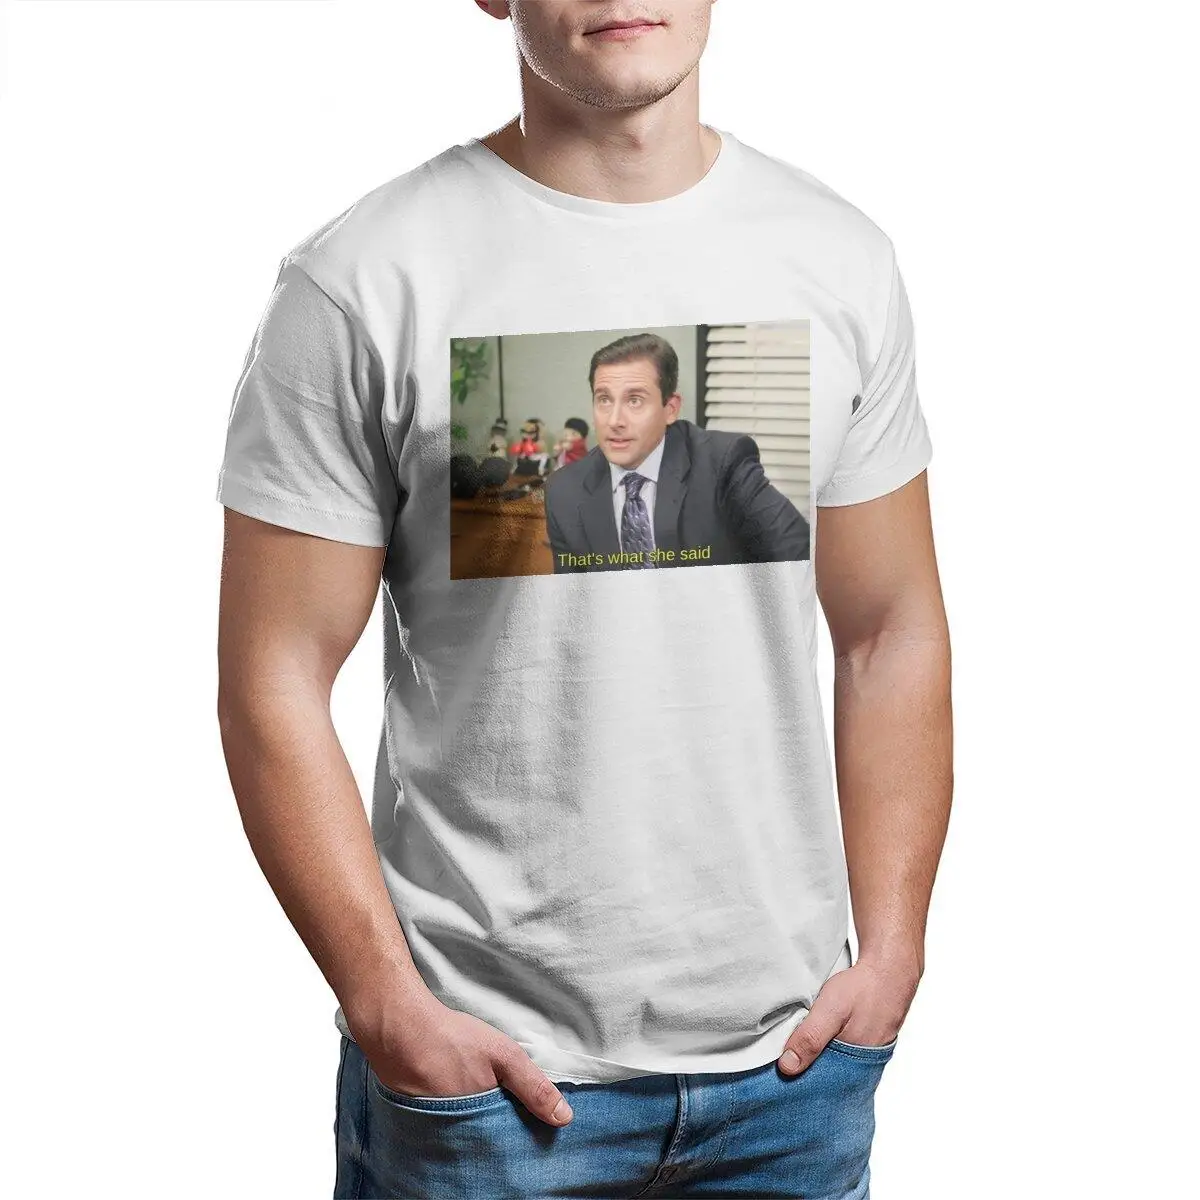 

The Office That's What She Said Michael Scott T Shirts for Men 100% Cotton Vintage T-Shirts Tv Show Tees Clothing Printed